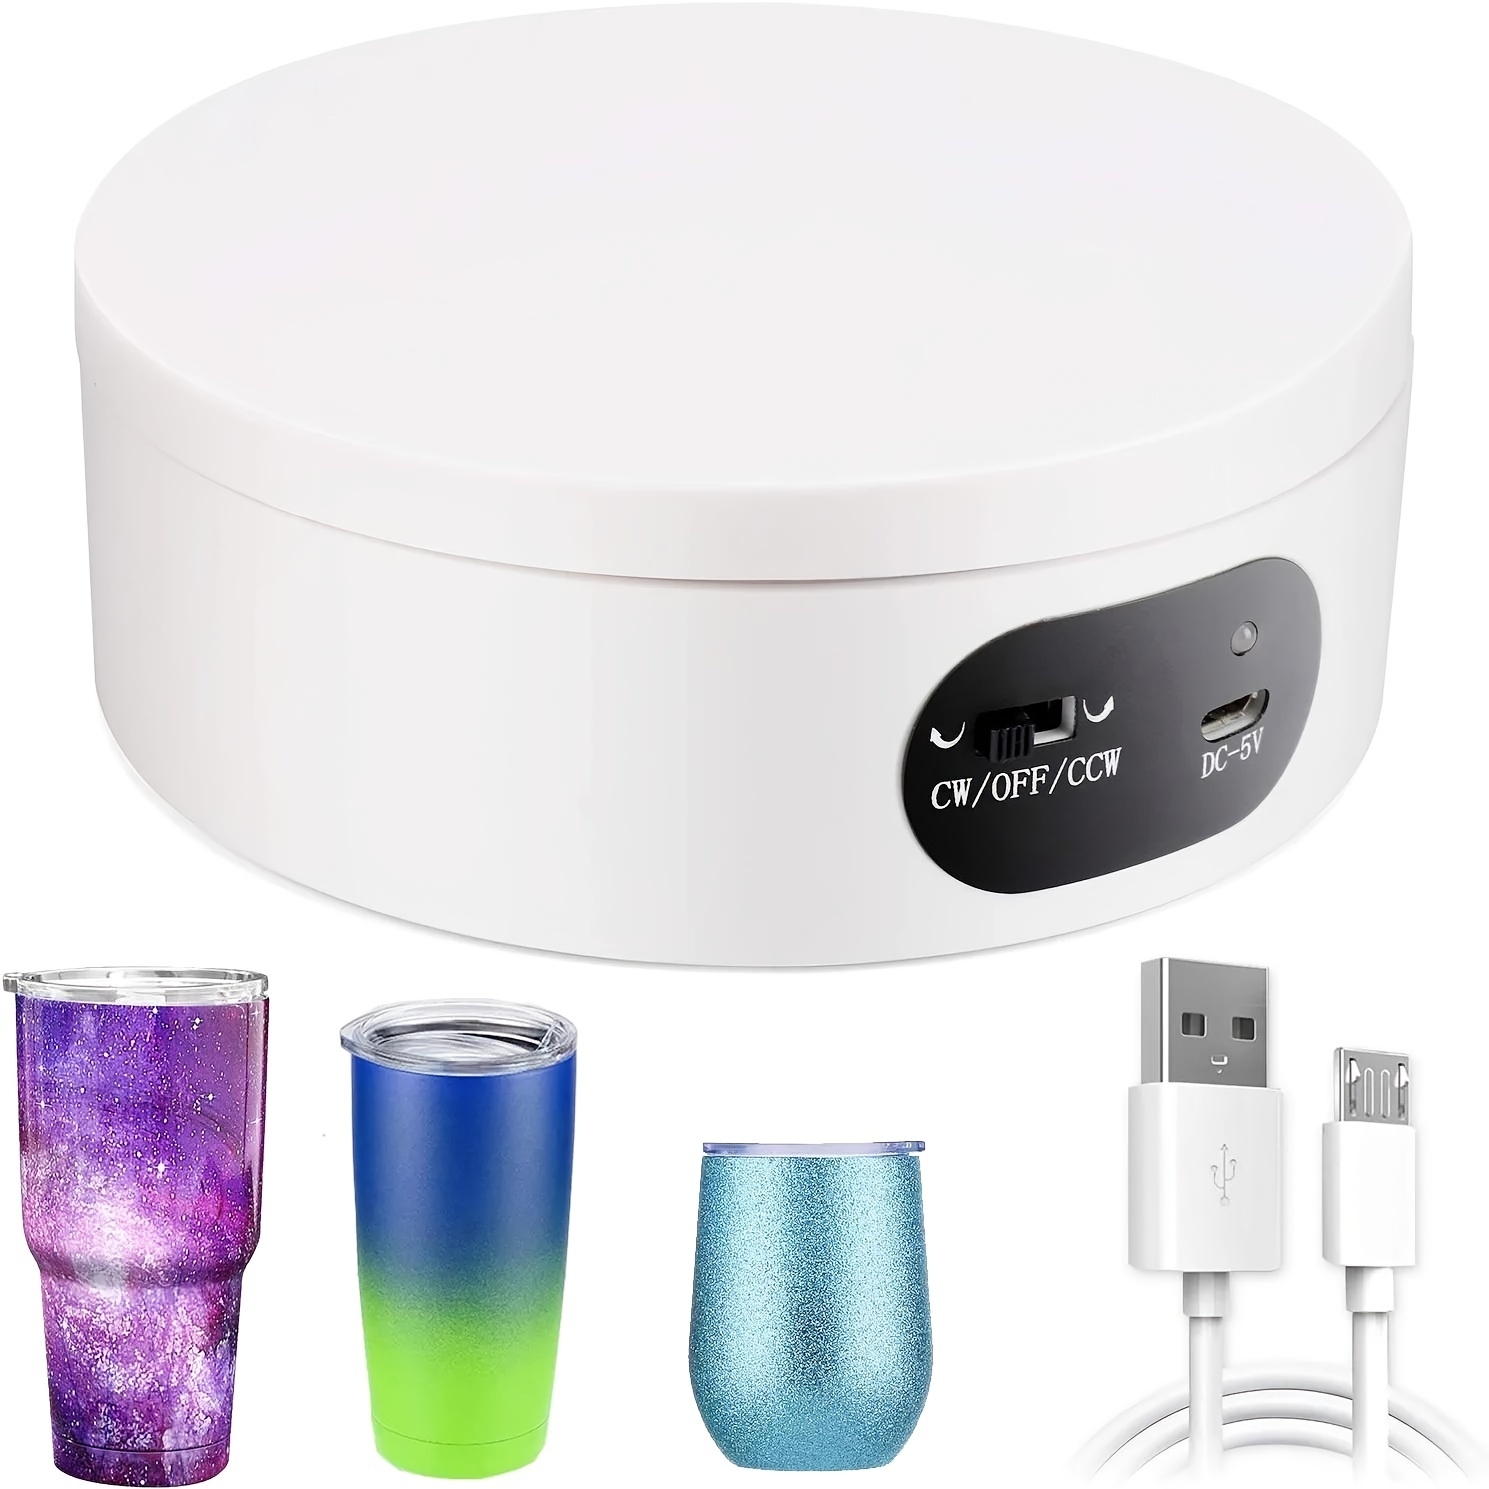 Riomh Cup Display Turner Stand, Rotating Base for Glitter Tumblers, Automatic Mute Rotating Turntable with 5 Colors Backgrounds for Epoxy Cup Display